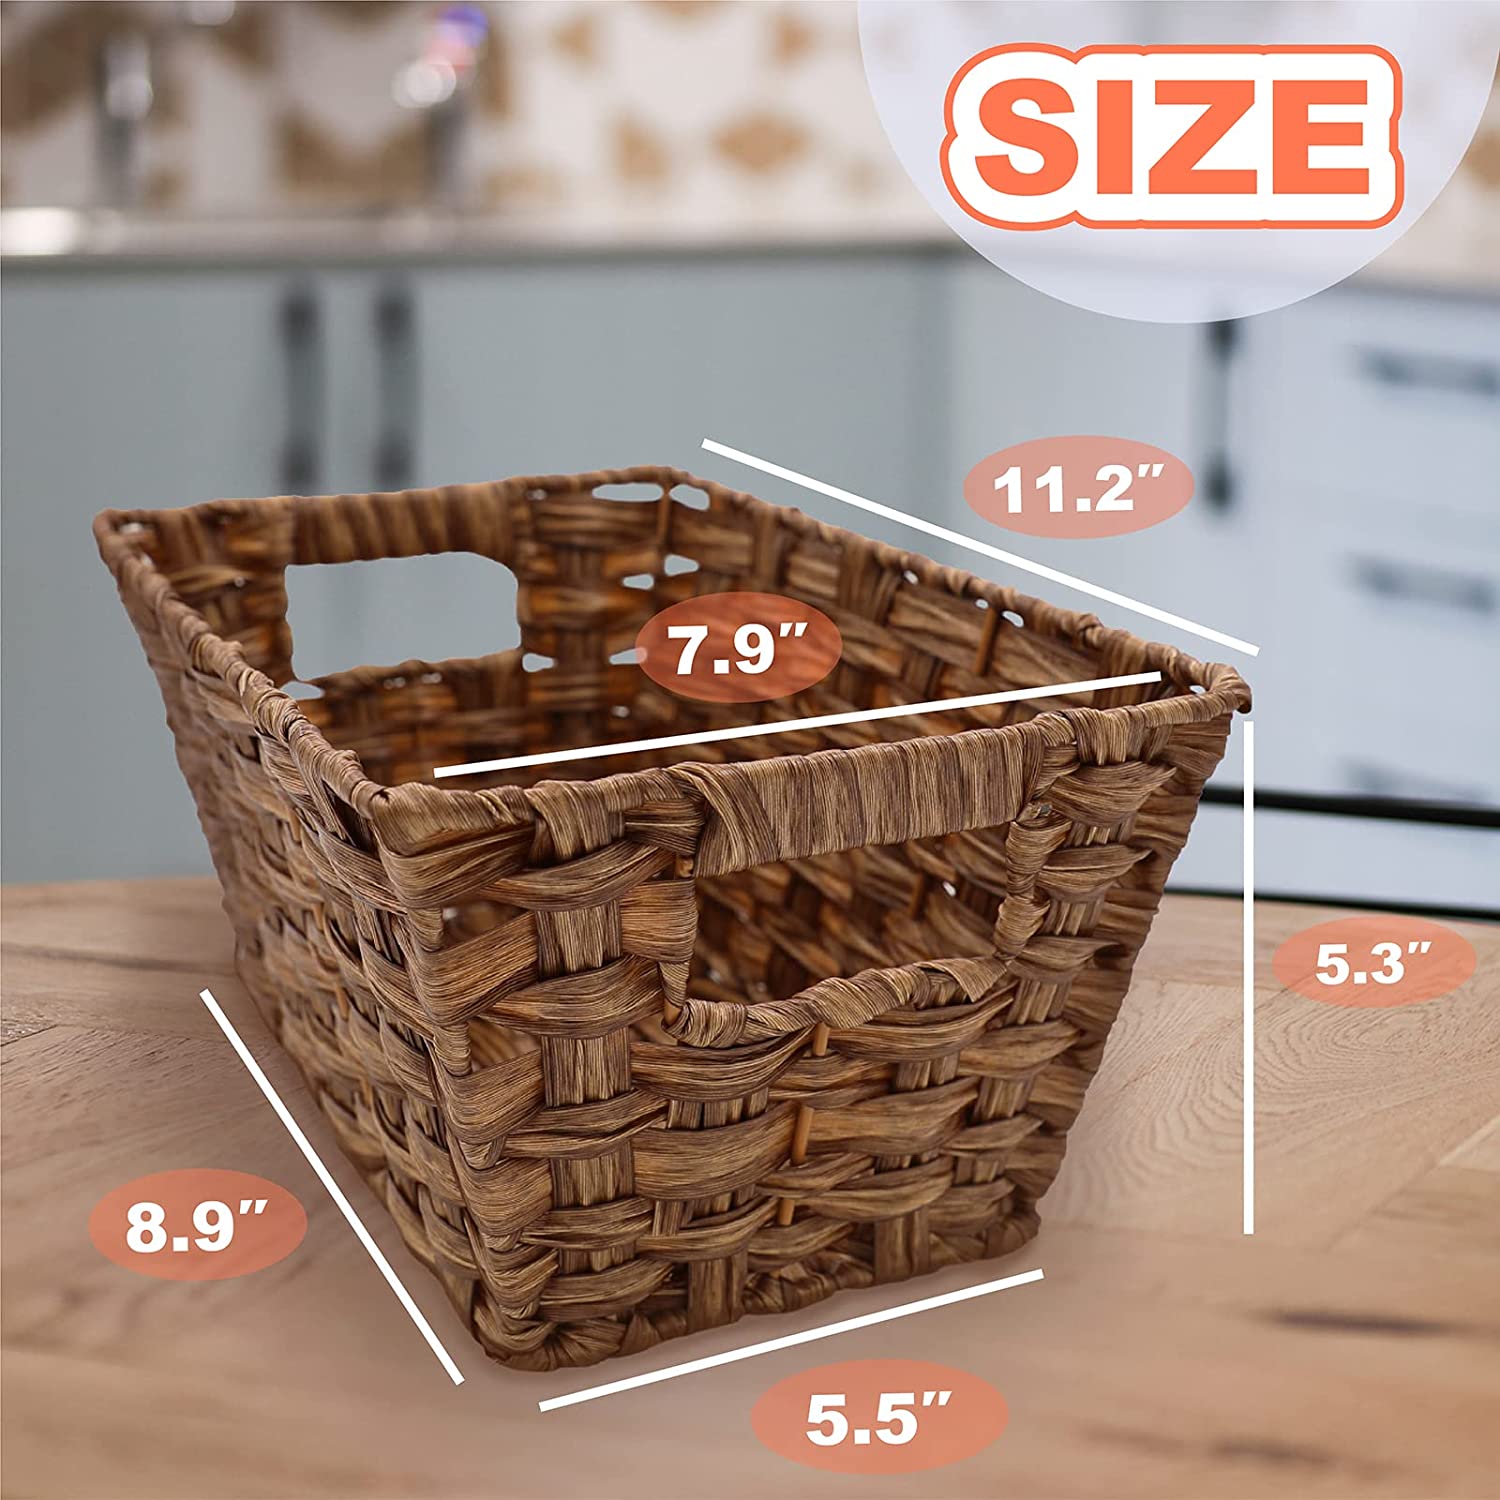 myHomeBody Wicker Basket With 3 Compartments, Woven Baskets for Organizing,  Storage Basket, Toilet Tank Basket, Bathroom Counter Organizer, Bedroom